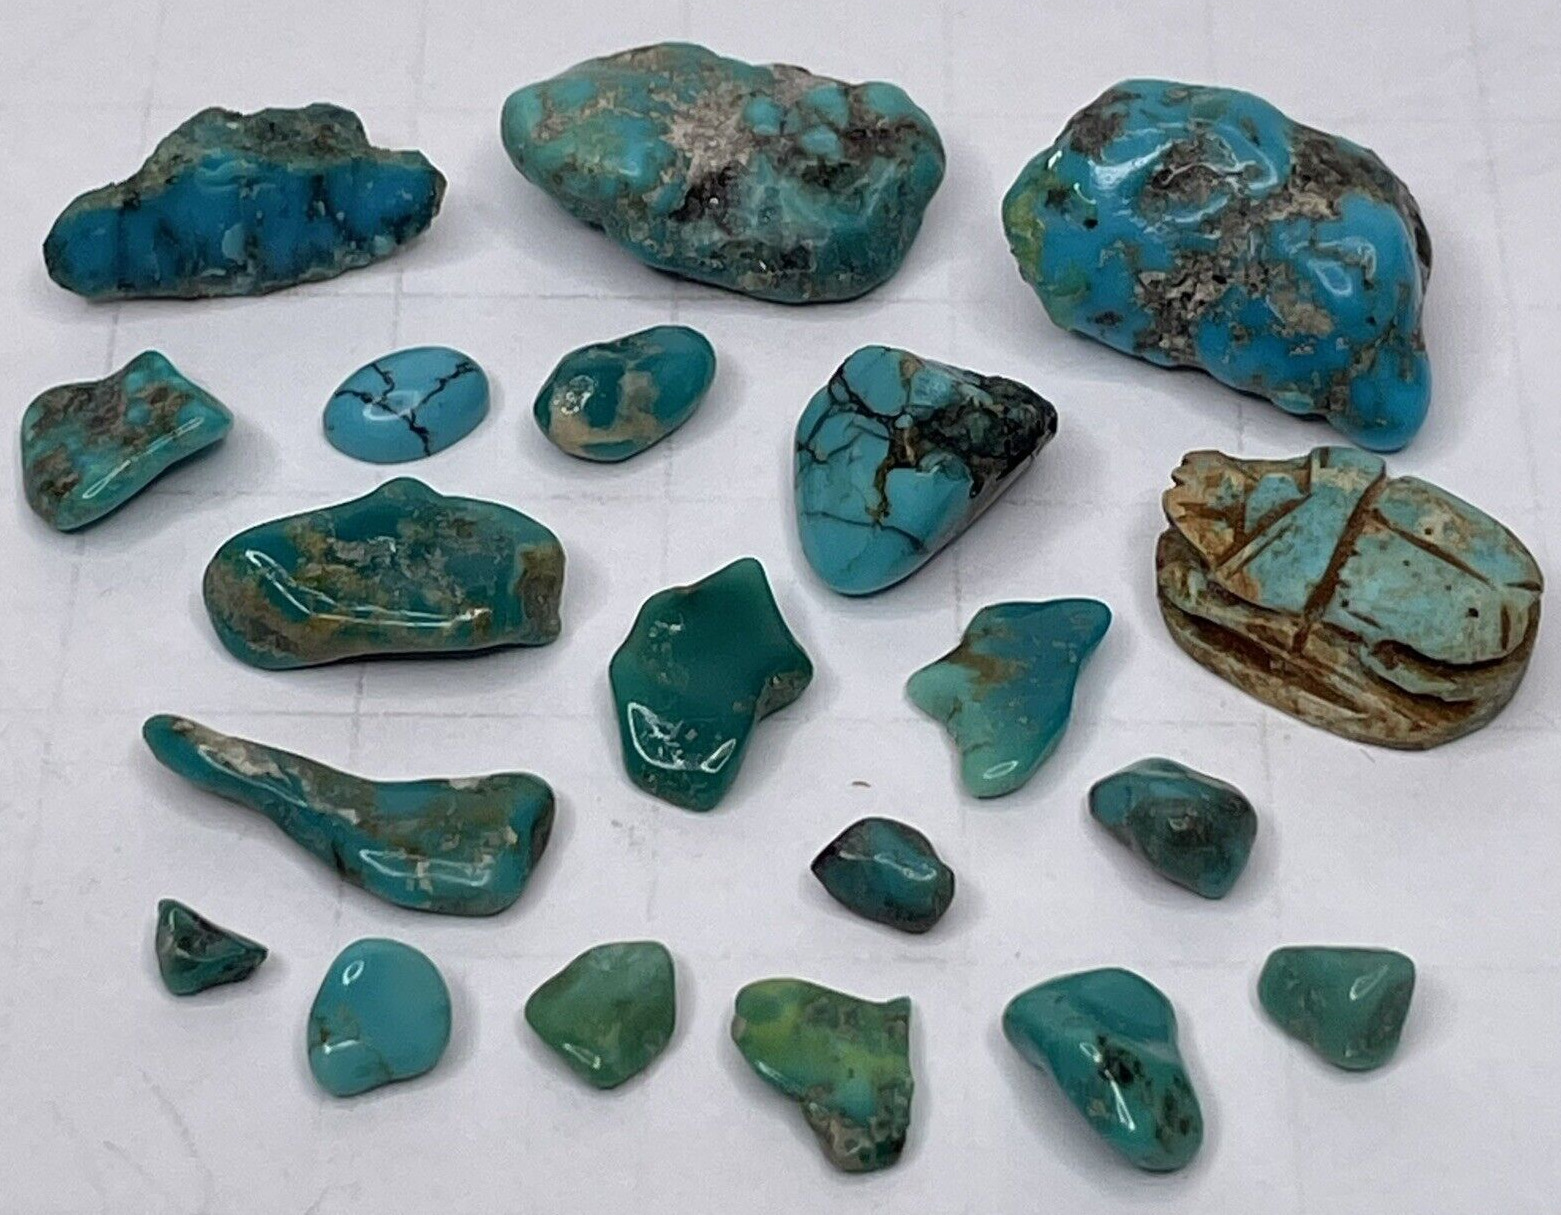 Lot 20 Turquoise Rocks Small and Tiny Stone Bits Polished Nuggets